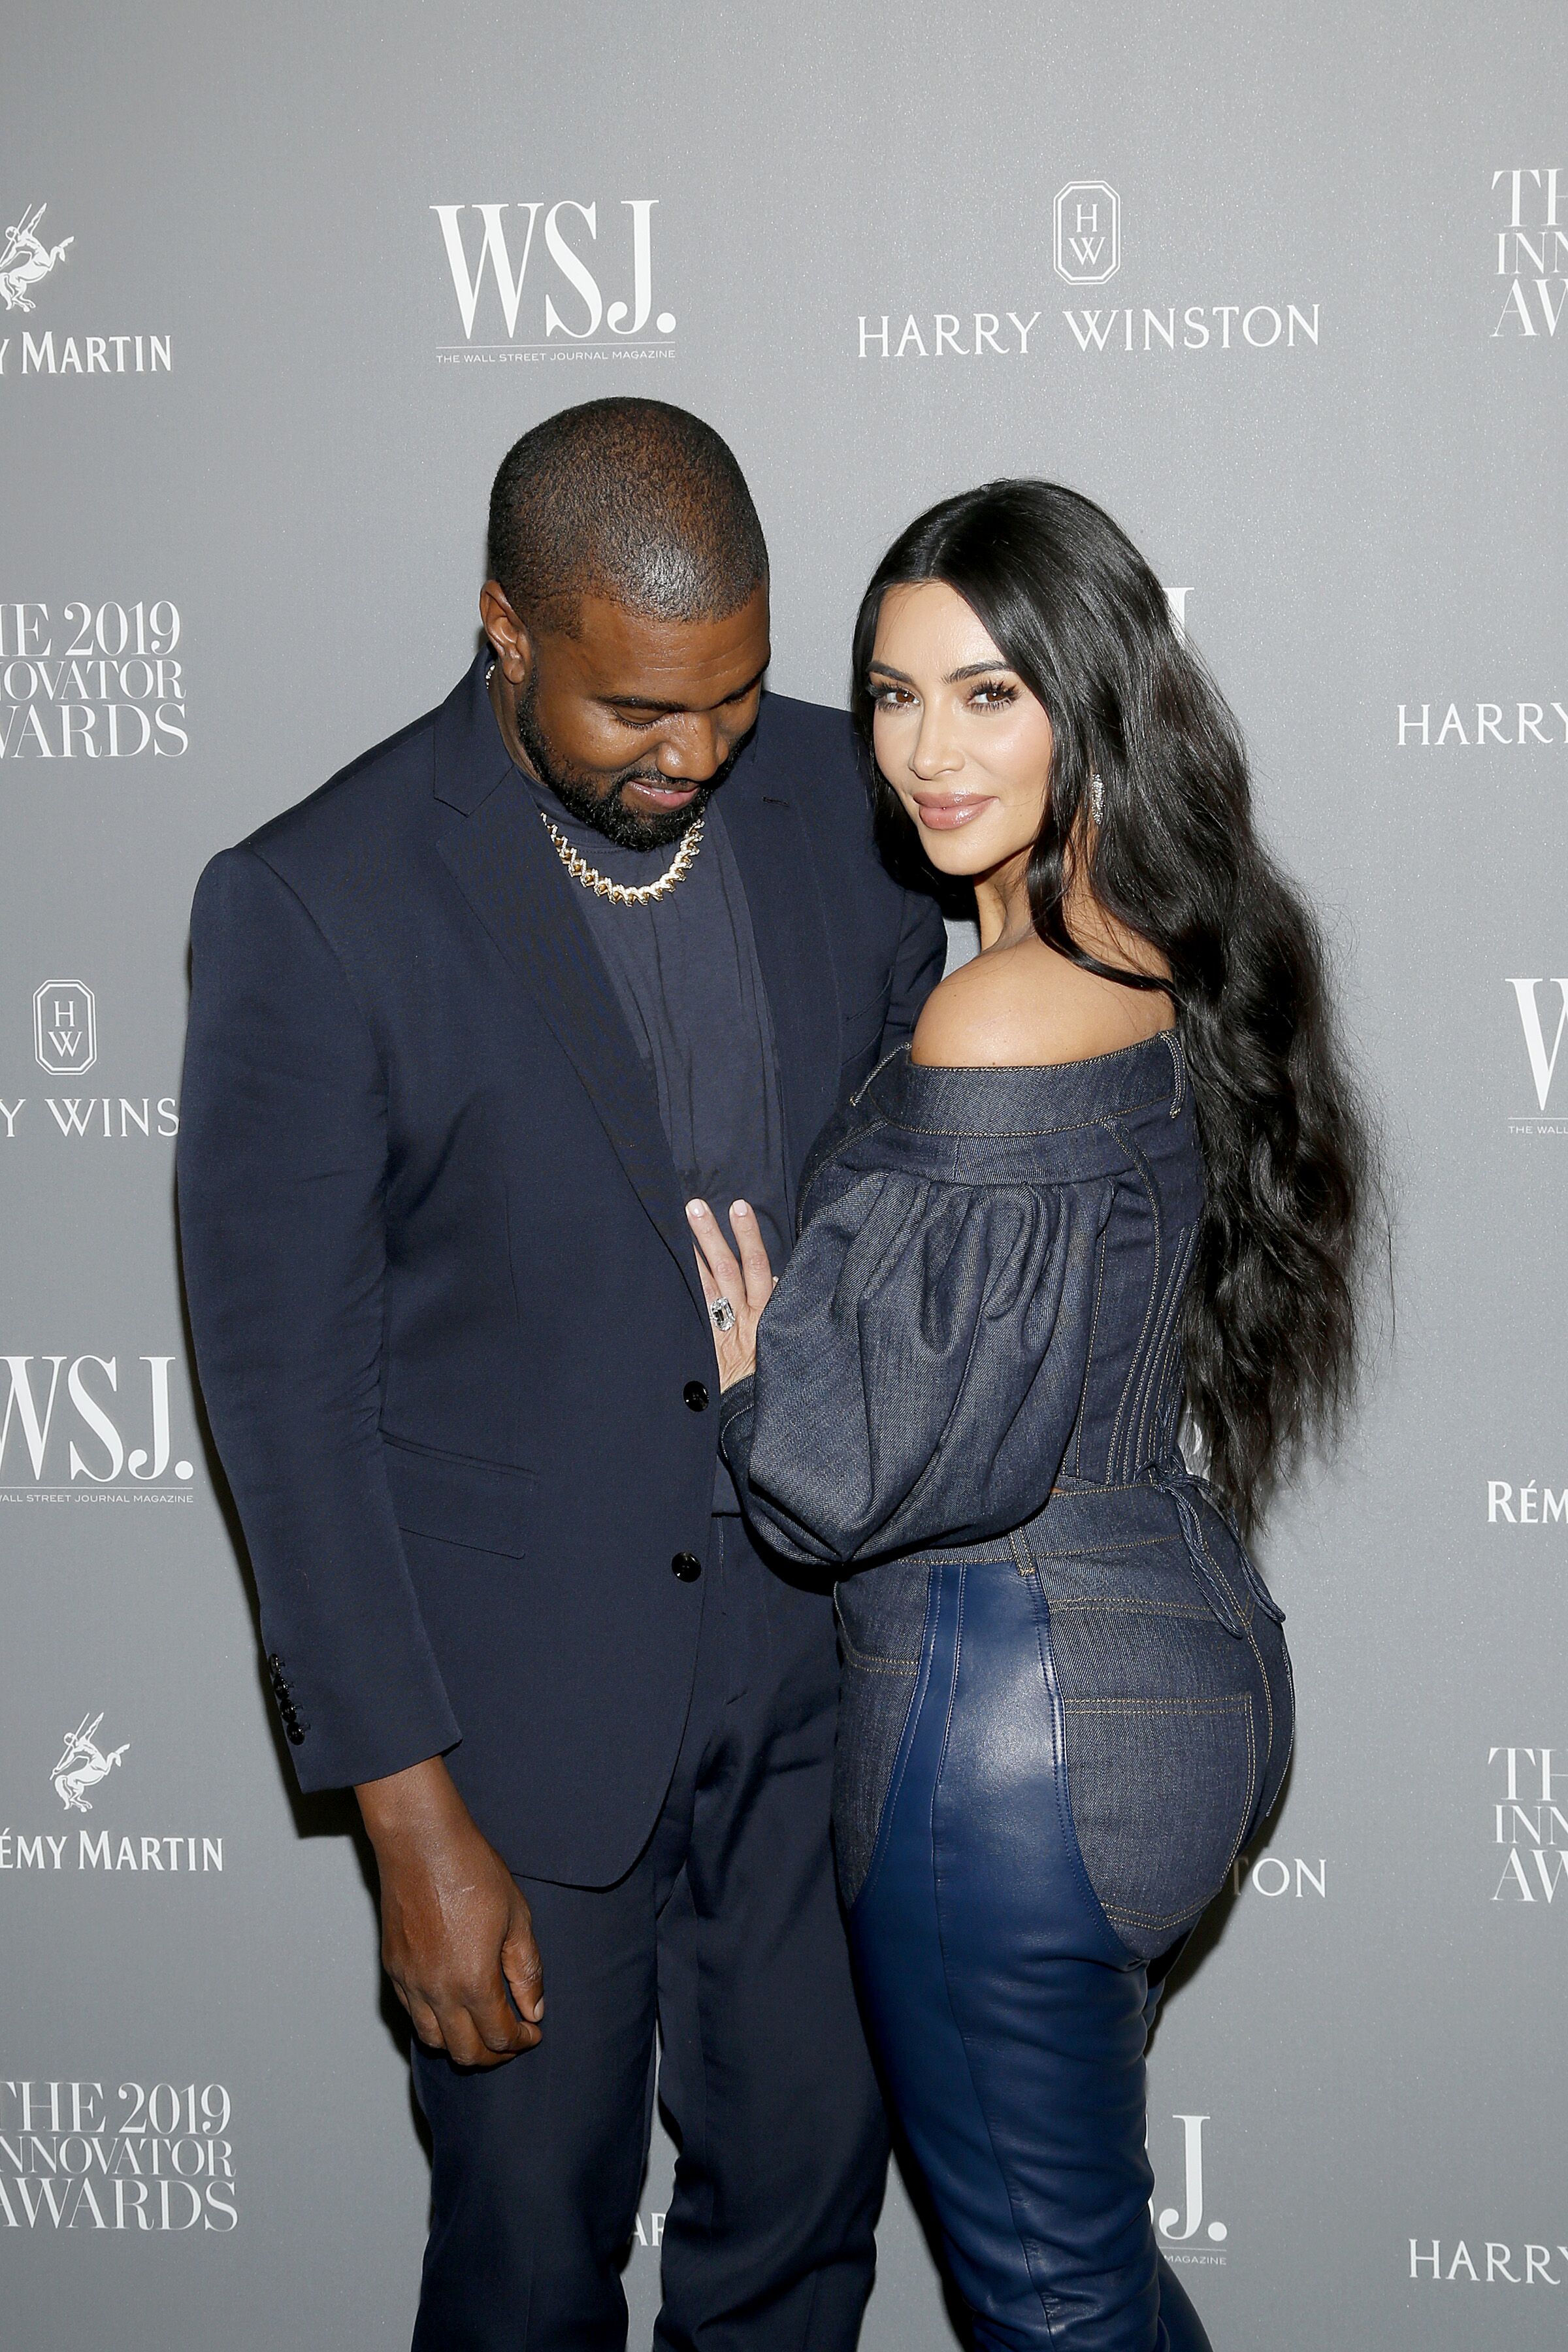 Kanye West and Kim Kardashian West at the 2019 WSJ. Magazine Innovator Awards in New York/ Source: Getty Images